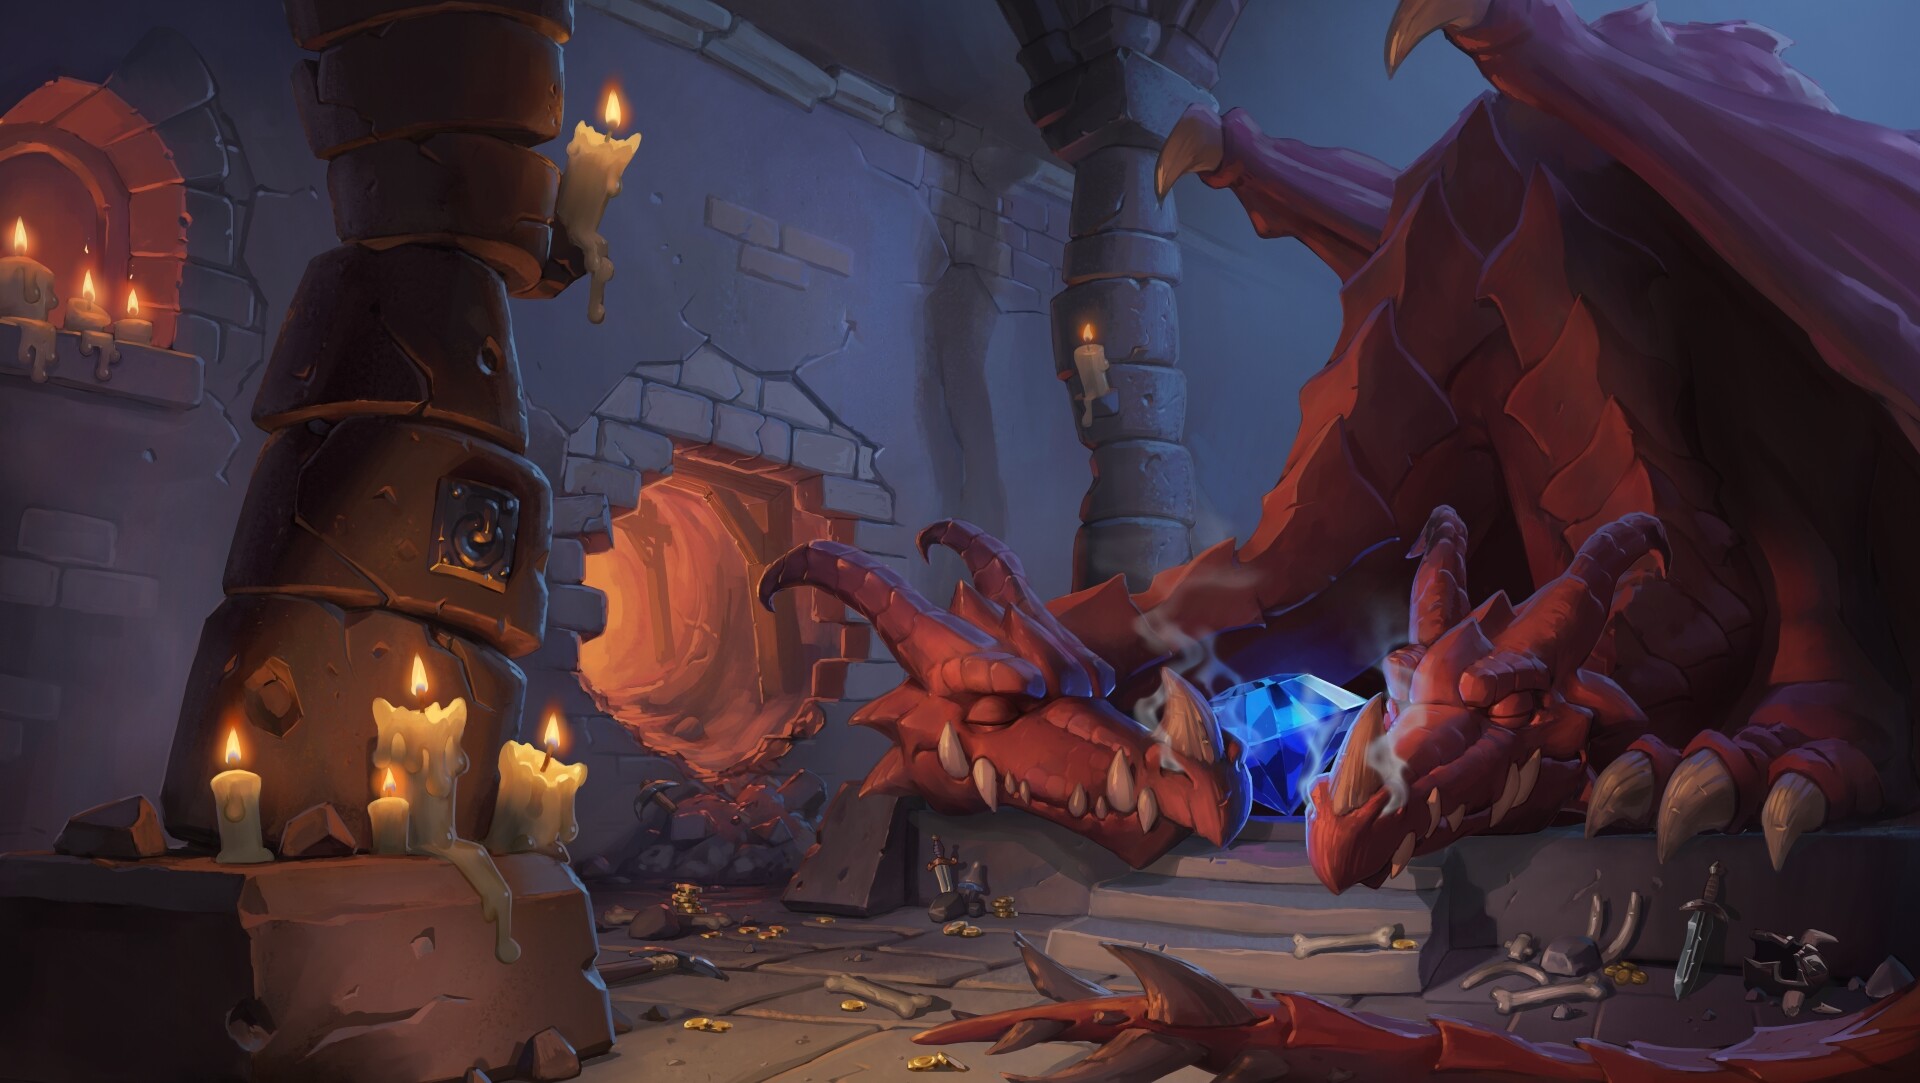 Hearthstone: Kobolds and Catacombs, A card game by Blizzard Entertainment. 1920x1090 HD Wallpaper.